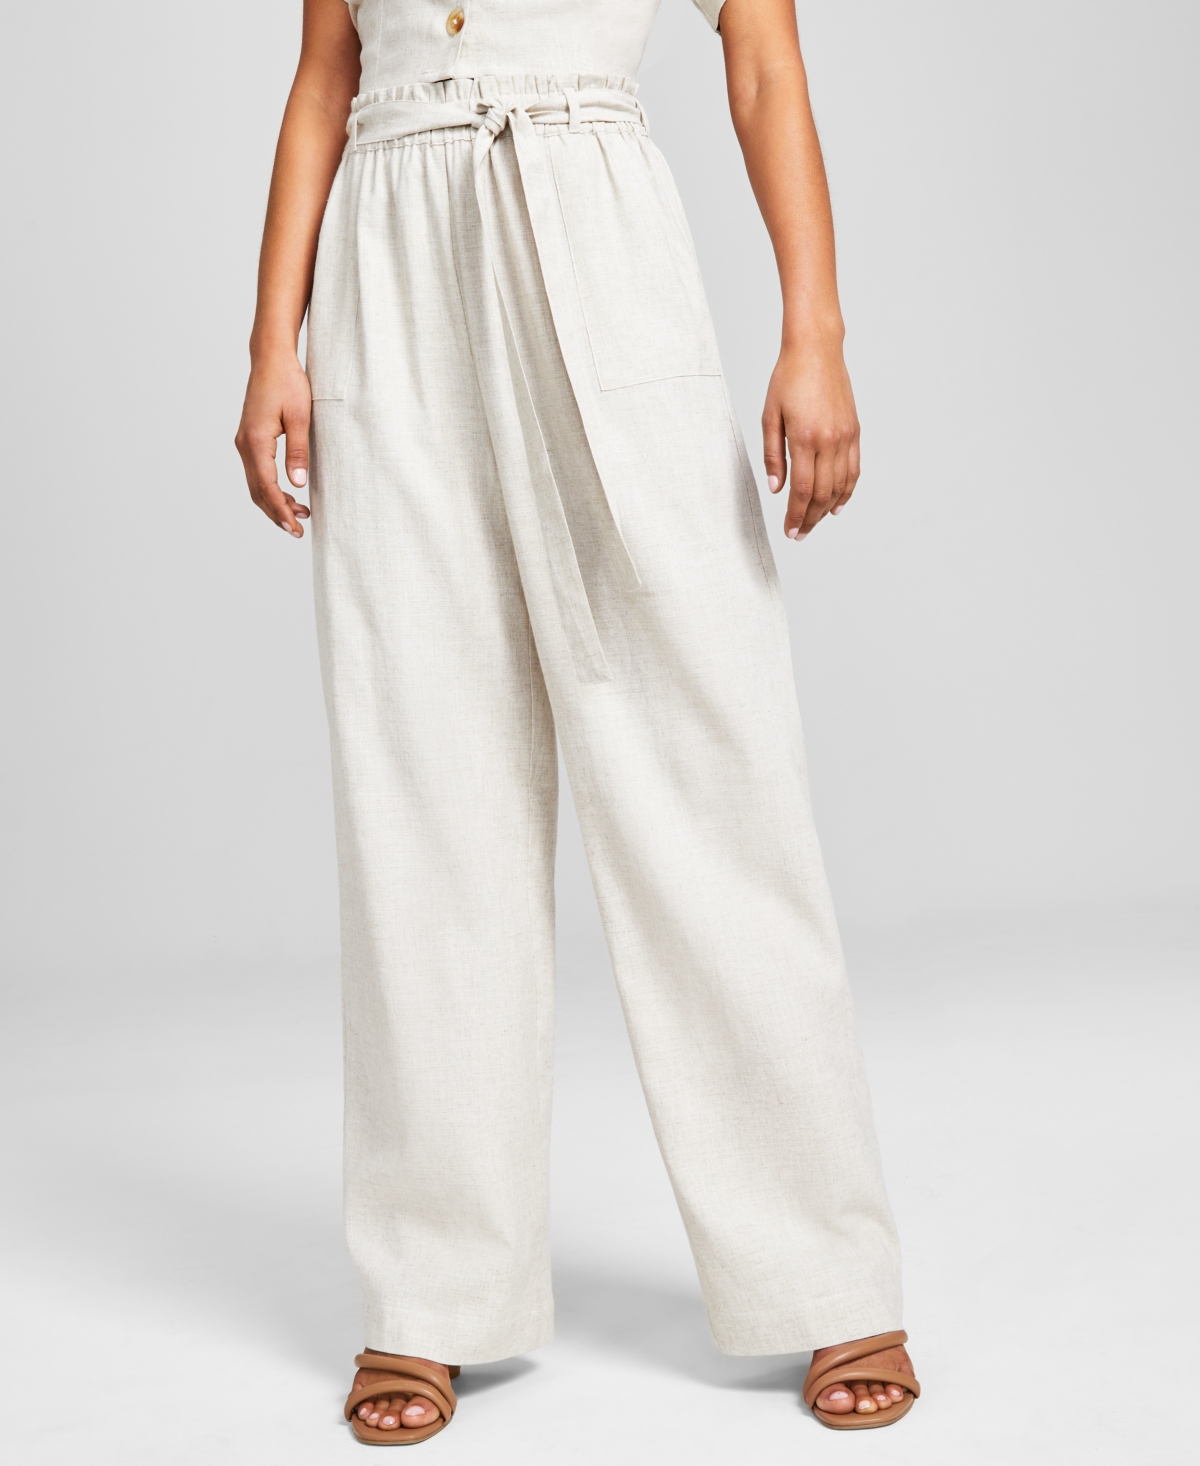 And Now This Women's Linen Blend Paperbag Pants In Tan